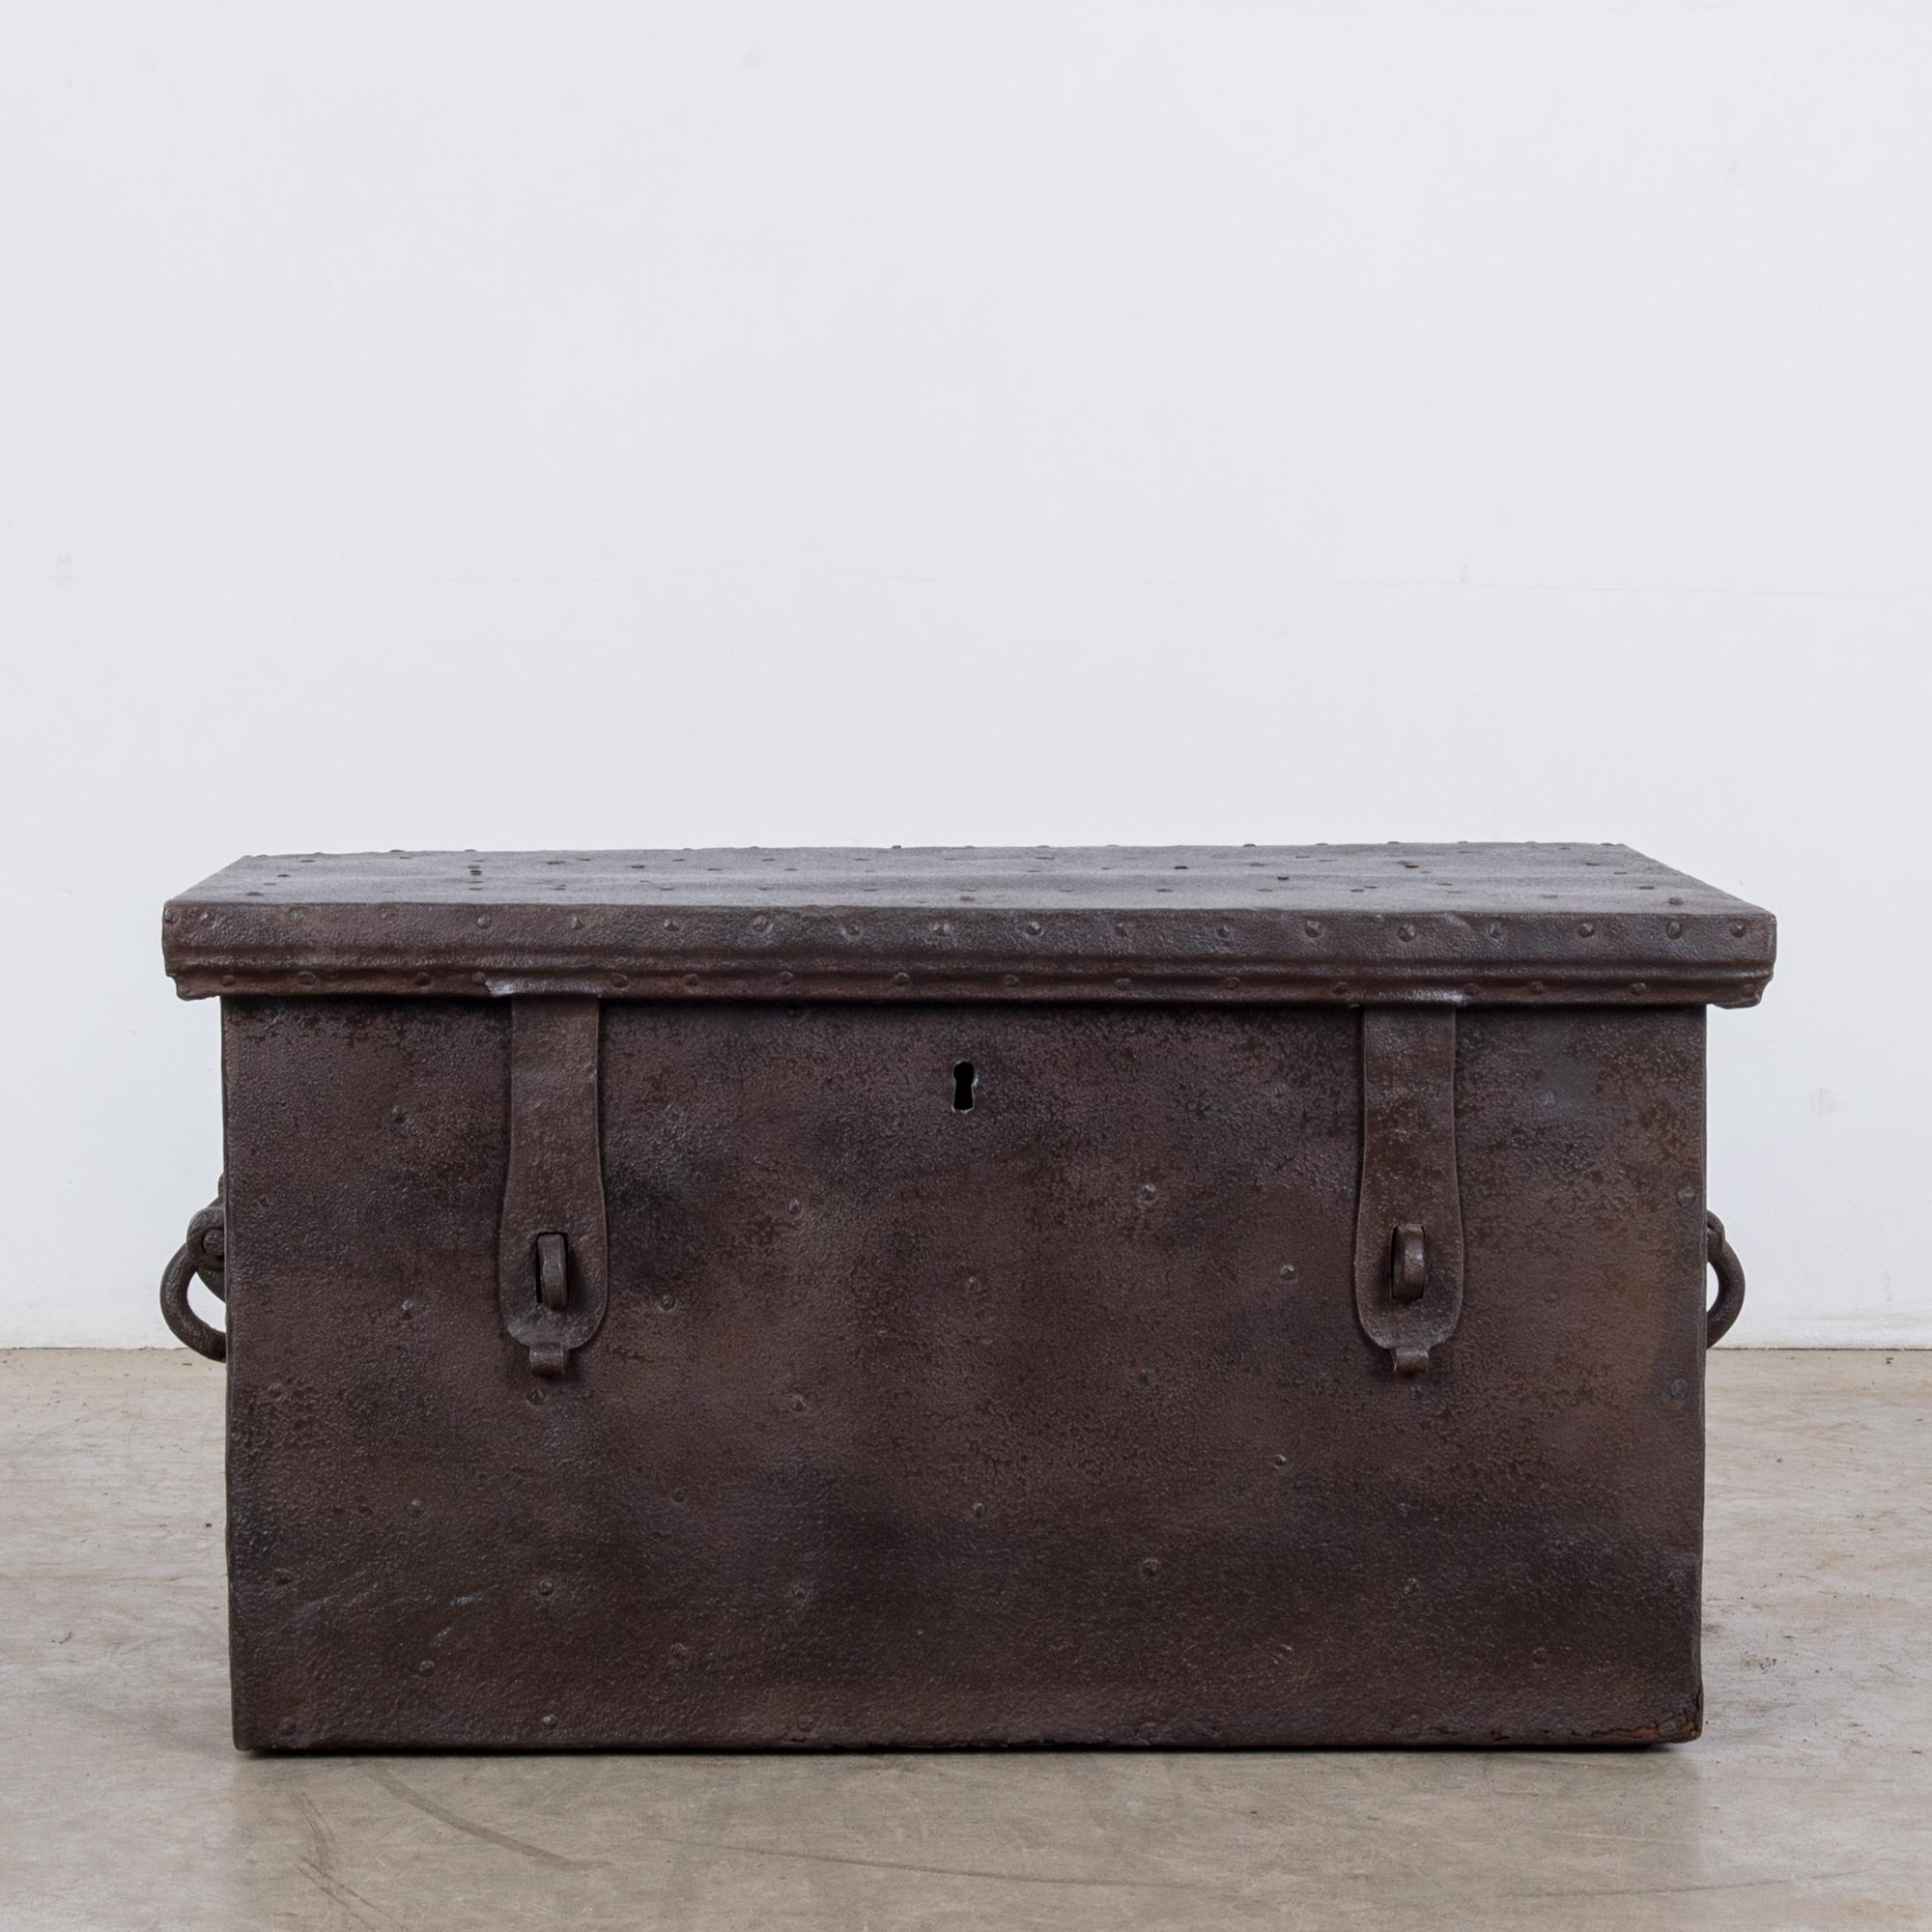 This wooden trunk with a full metal finish was made in France, circa 1880, and displays an exquisite, rich patina. Standing at fourteen inches high and constructed with a flat top, this piece is typical of trunks produced in the nineteenth century